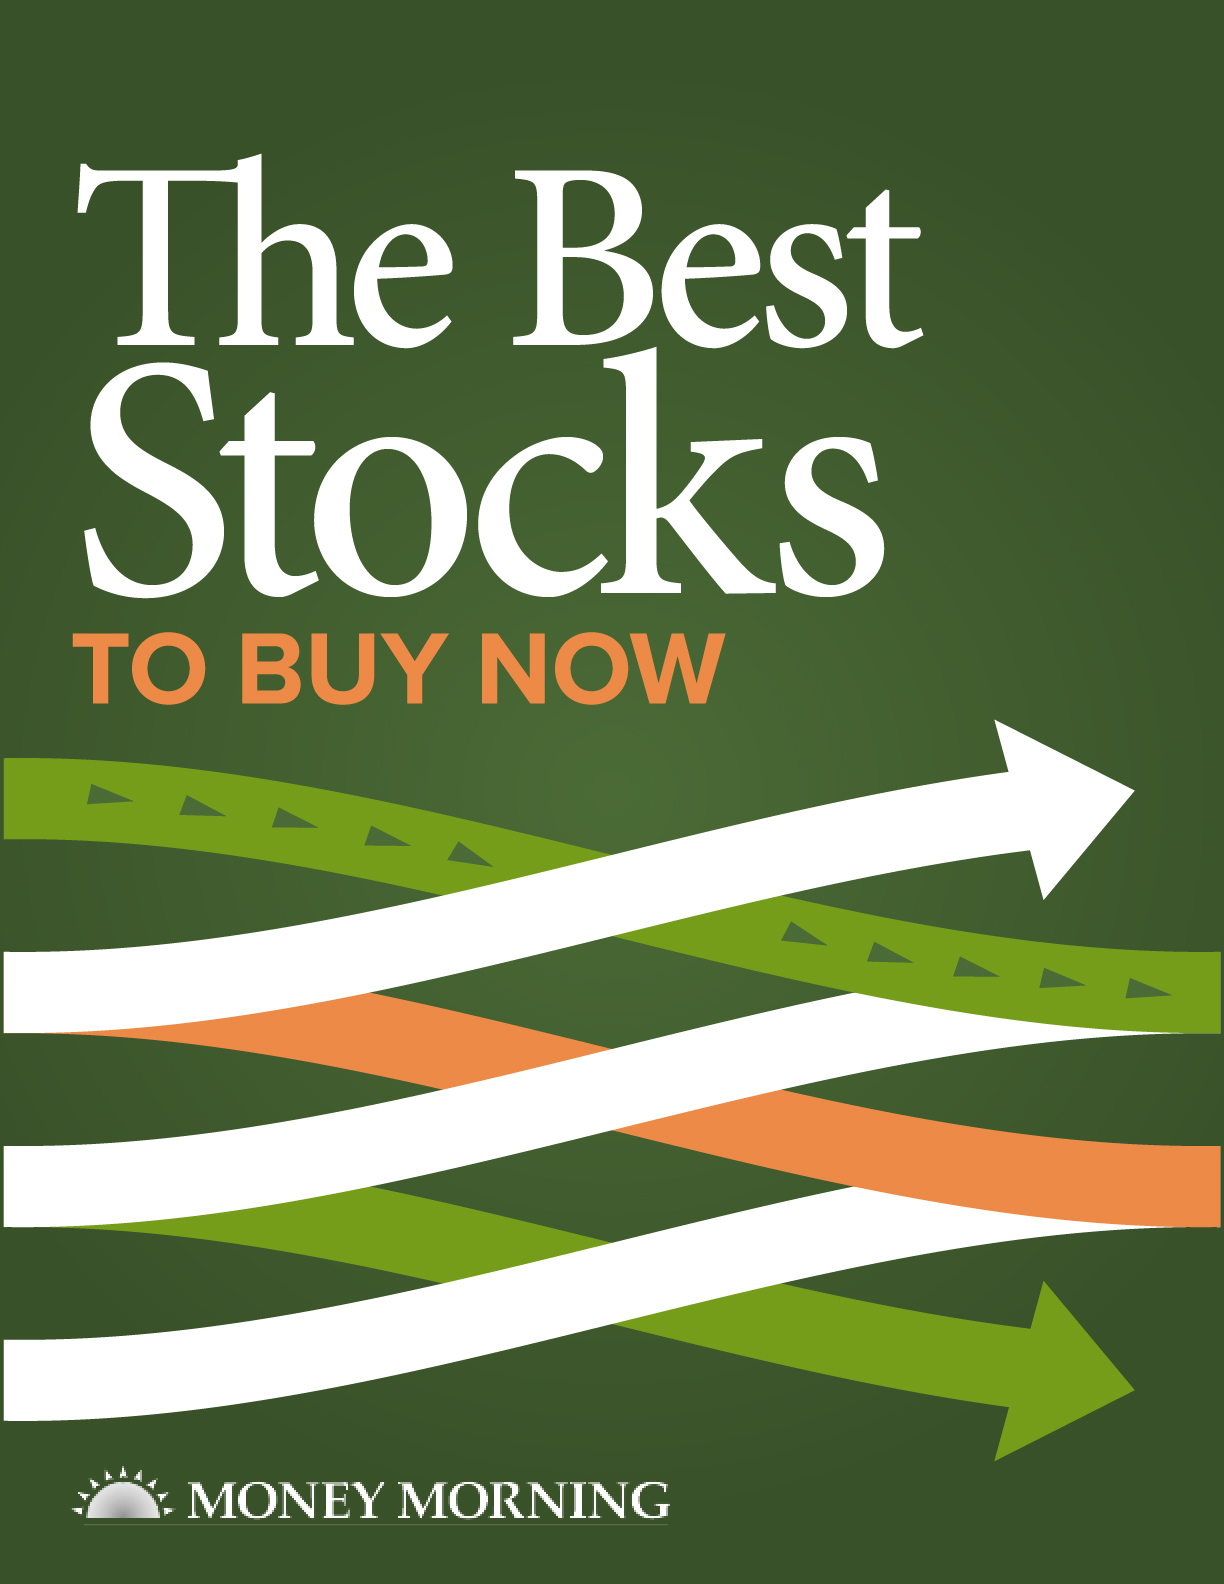 The 7 Must Have Stocks to Buy Now